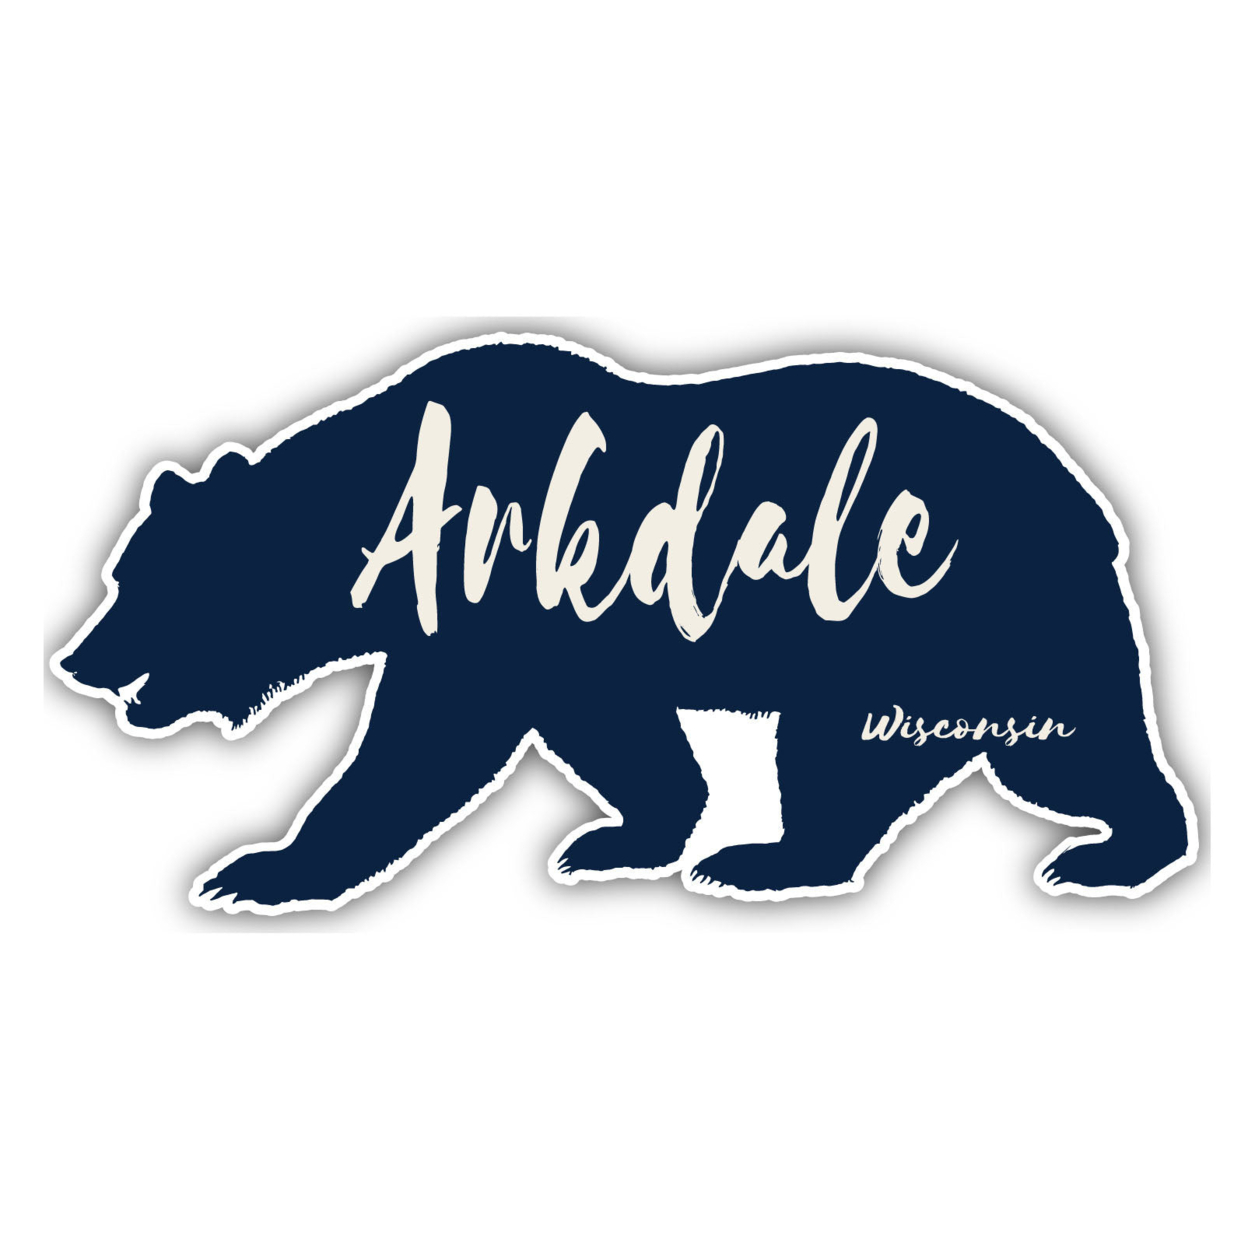 Arkdale Wisconsin Souvenir Decorative Stickers (Choose Theme And Size) - Single Unit, 2-Inch, Tent